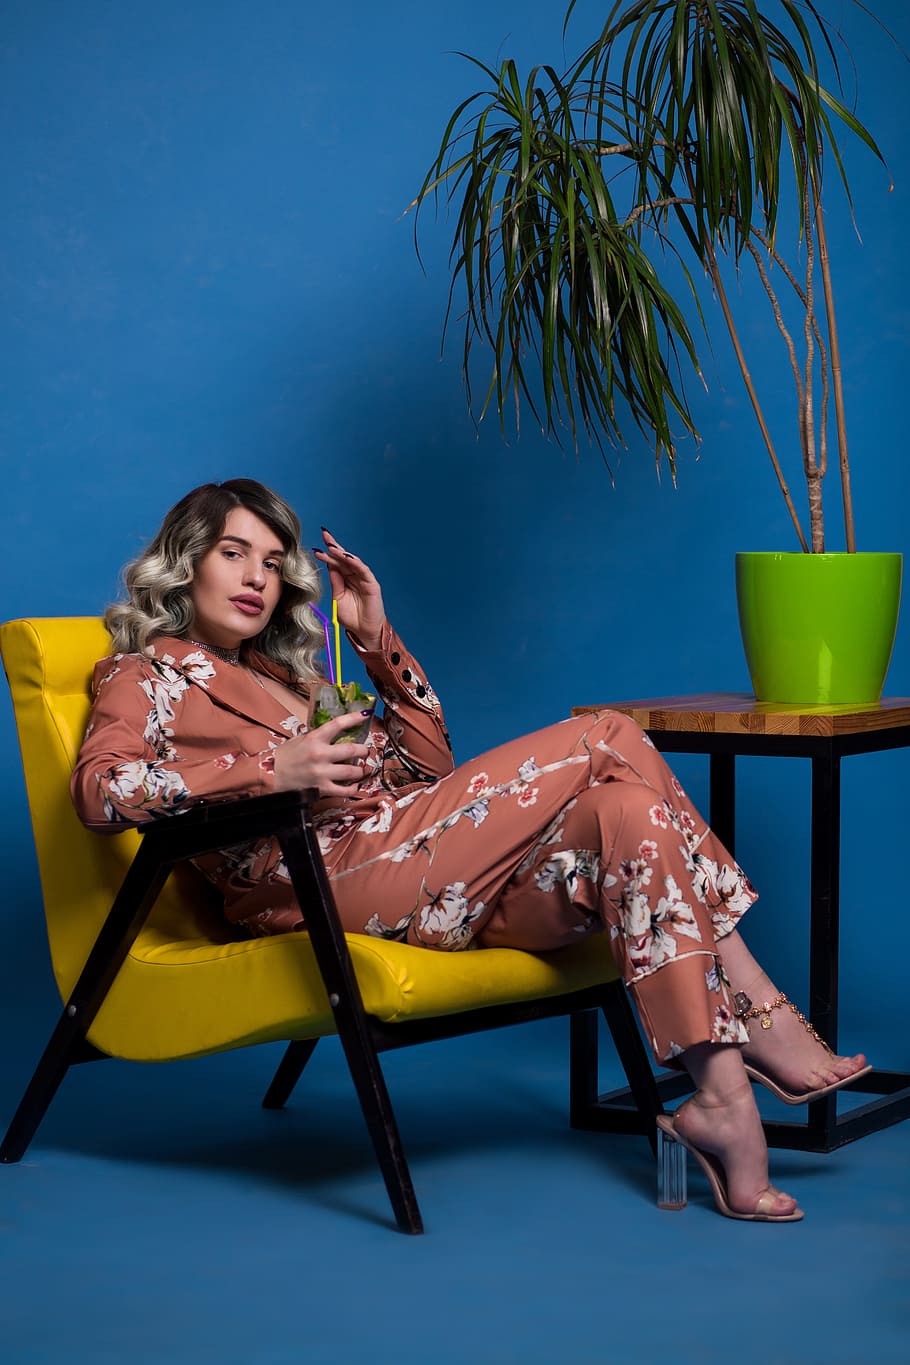 cool, woman, chilling, cocktail, yellow, chair, blue, wall, green, vase